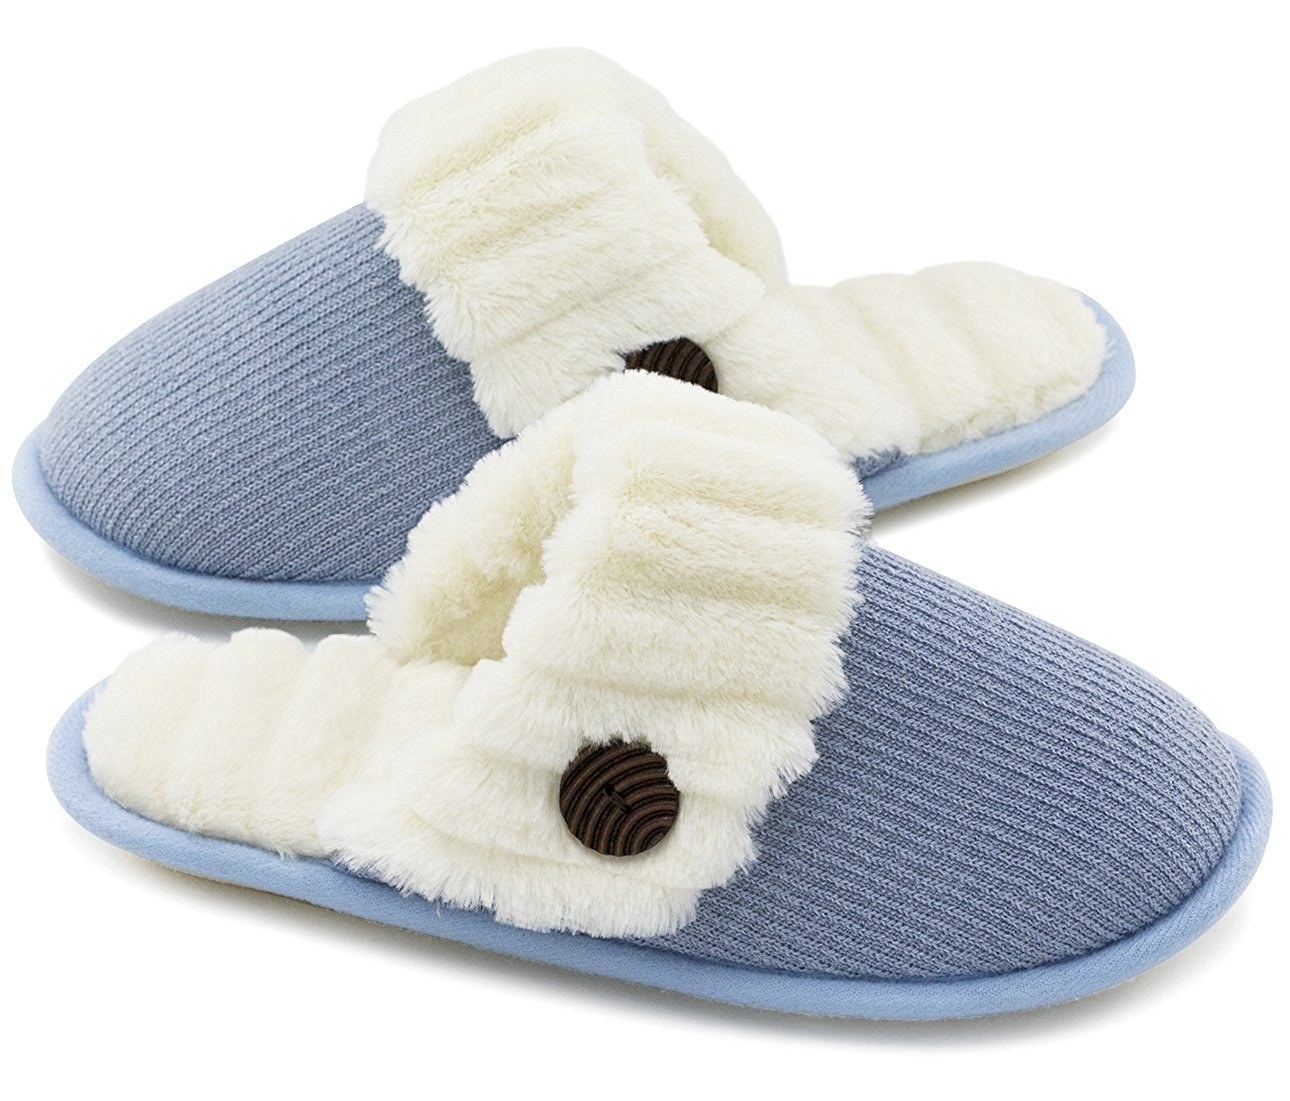 acorn slippers promotional code